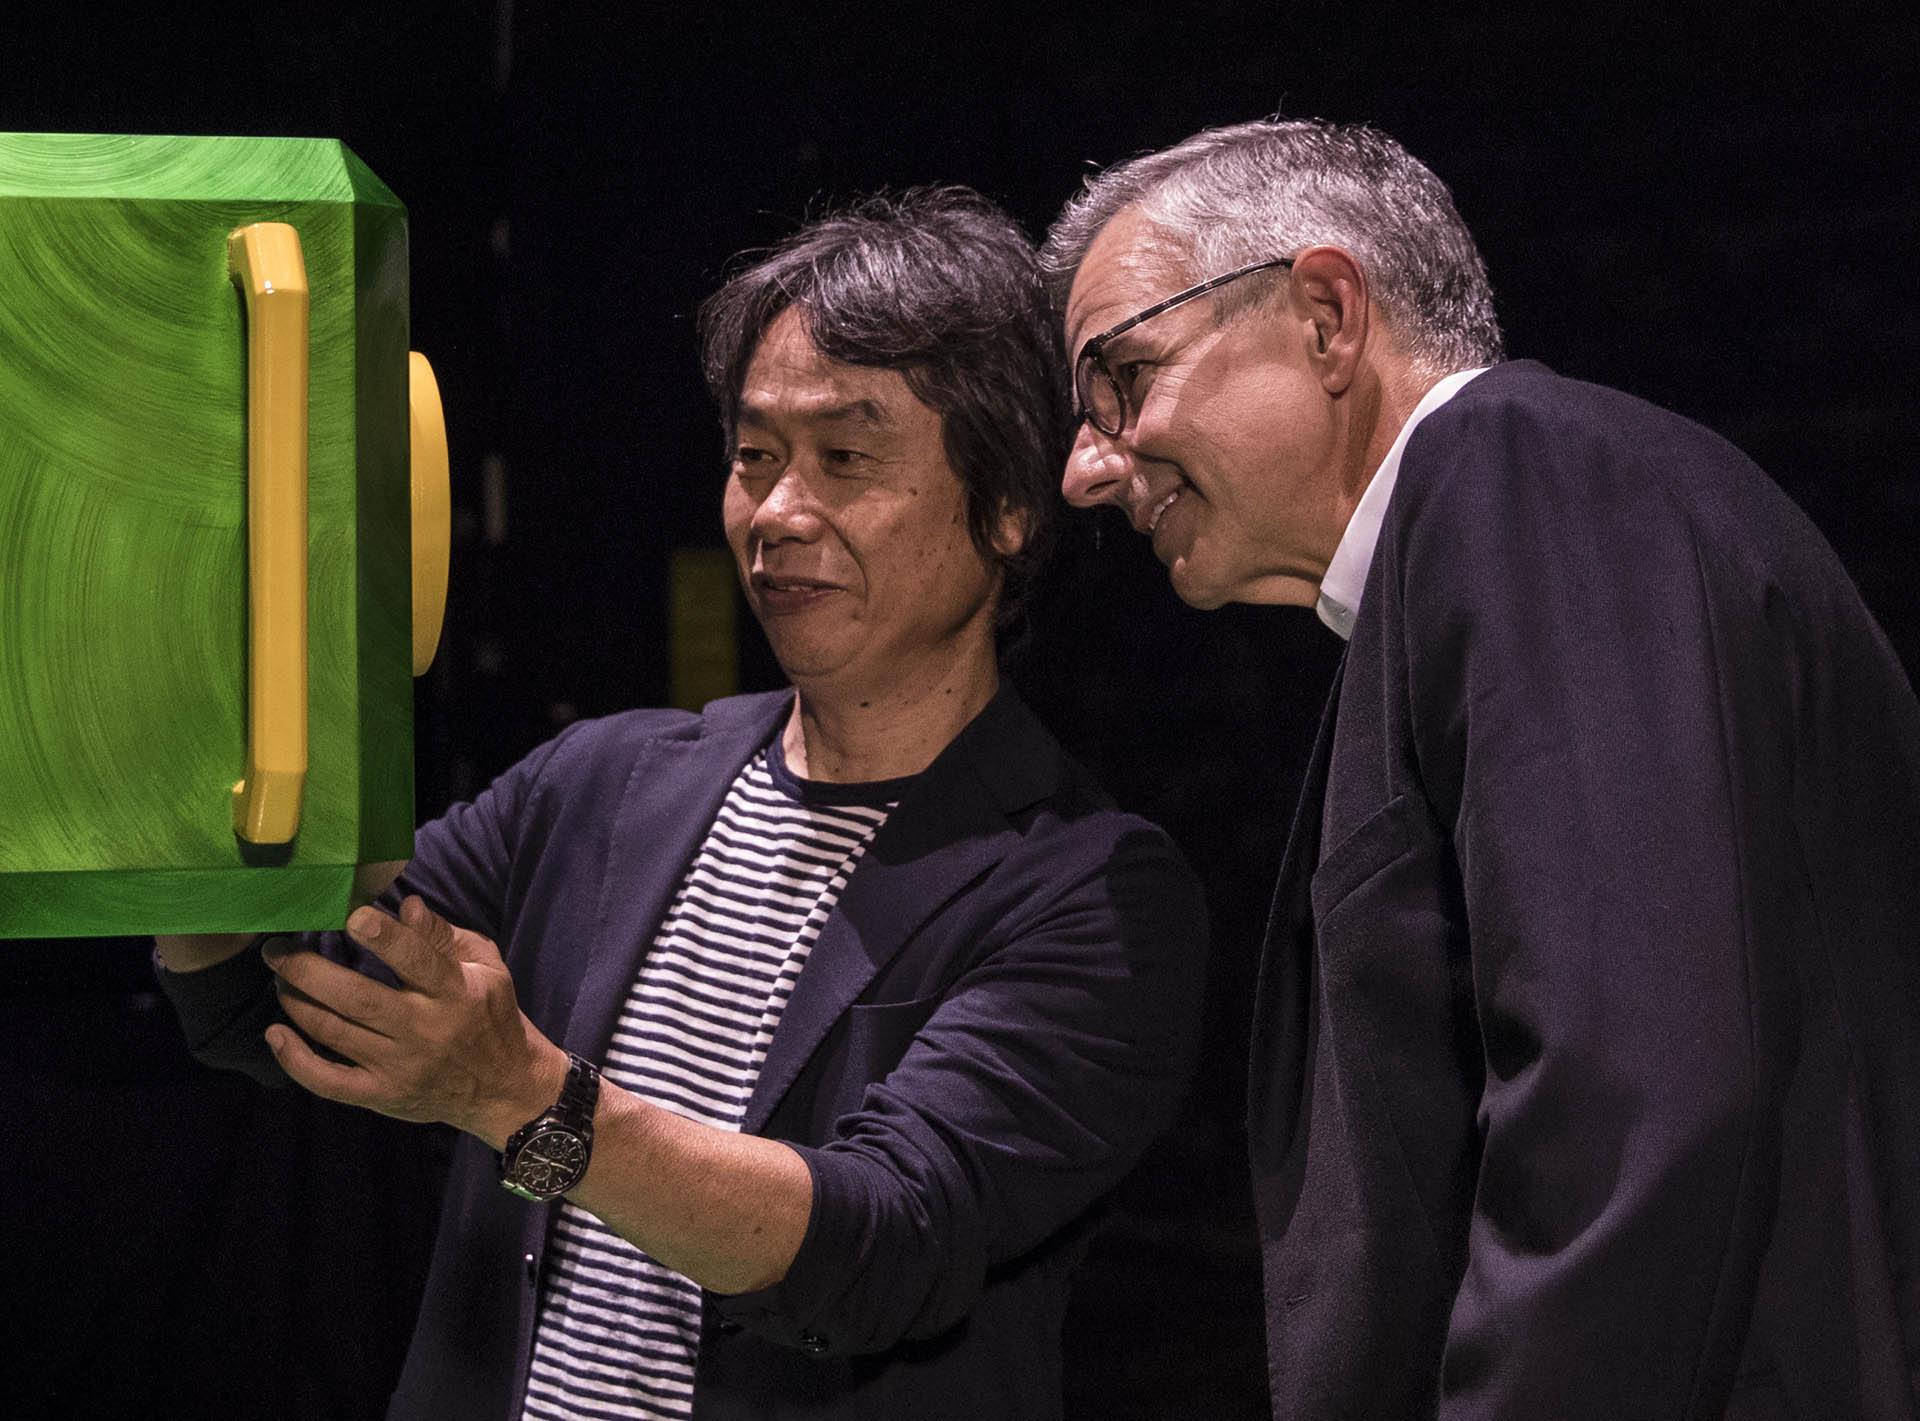 Shigeru Miyamoto, Director and Creative Fellow of Nintendo, discusses attraction features with Mark Woodbury, President of Universal Creative. © 2016 Universal Studios. All Rights Reserved.